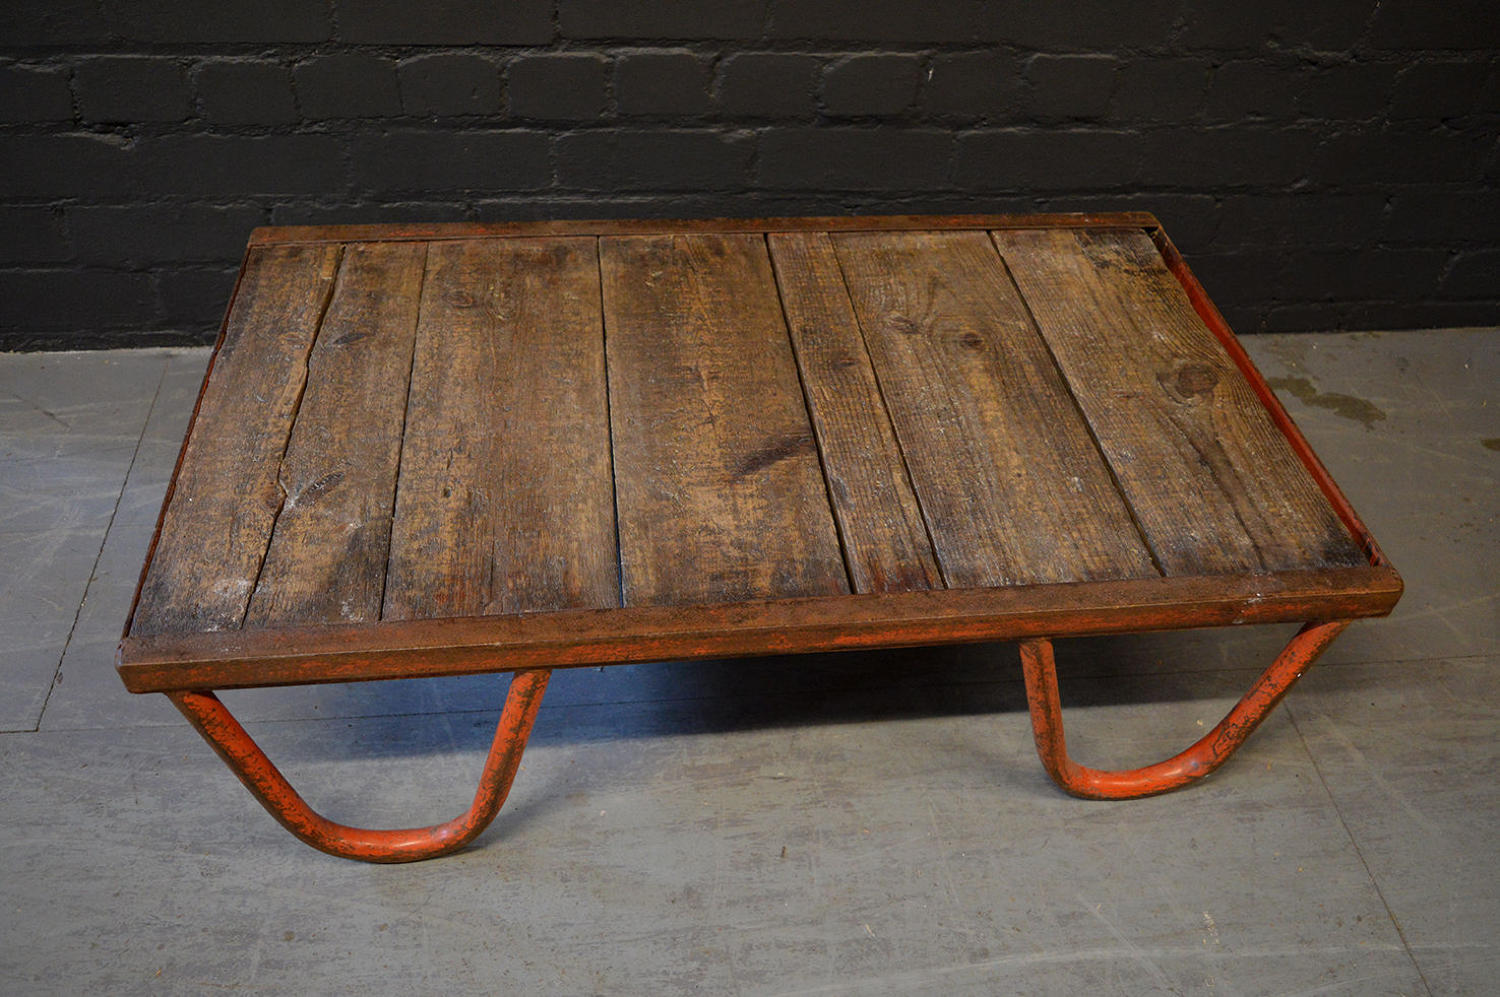 Vintage French Railway industrial pallet coffee table